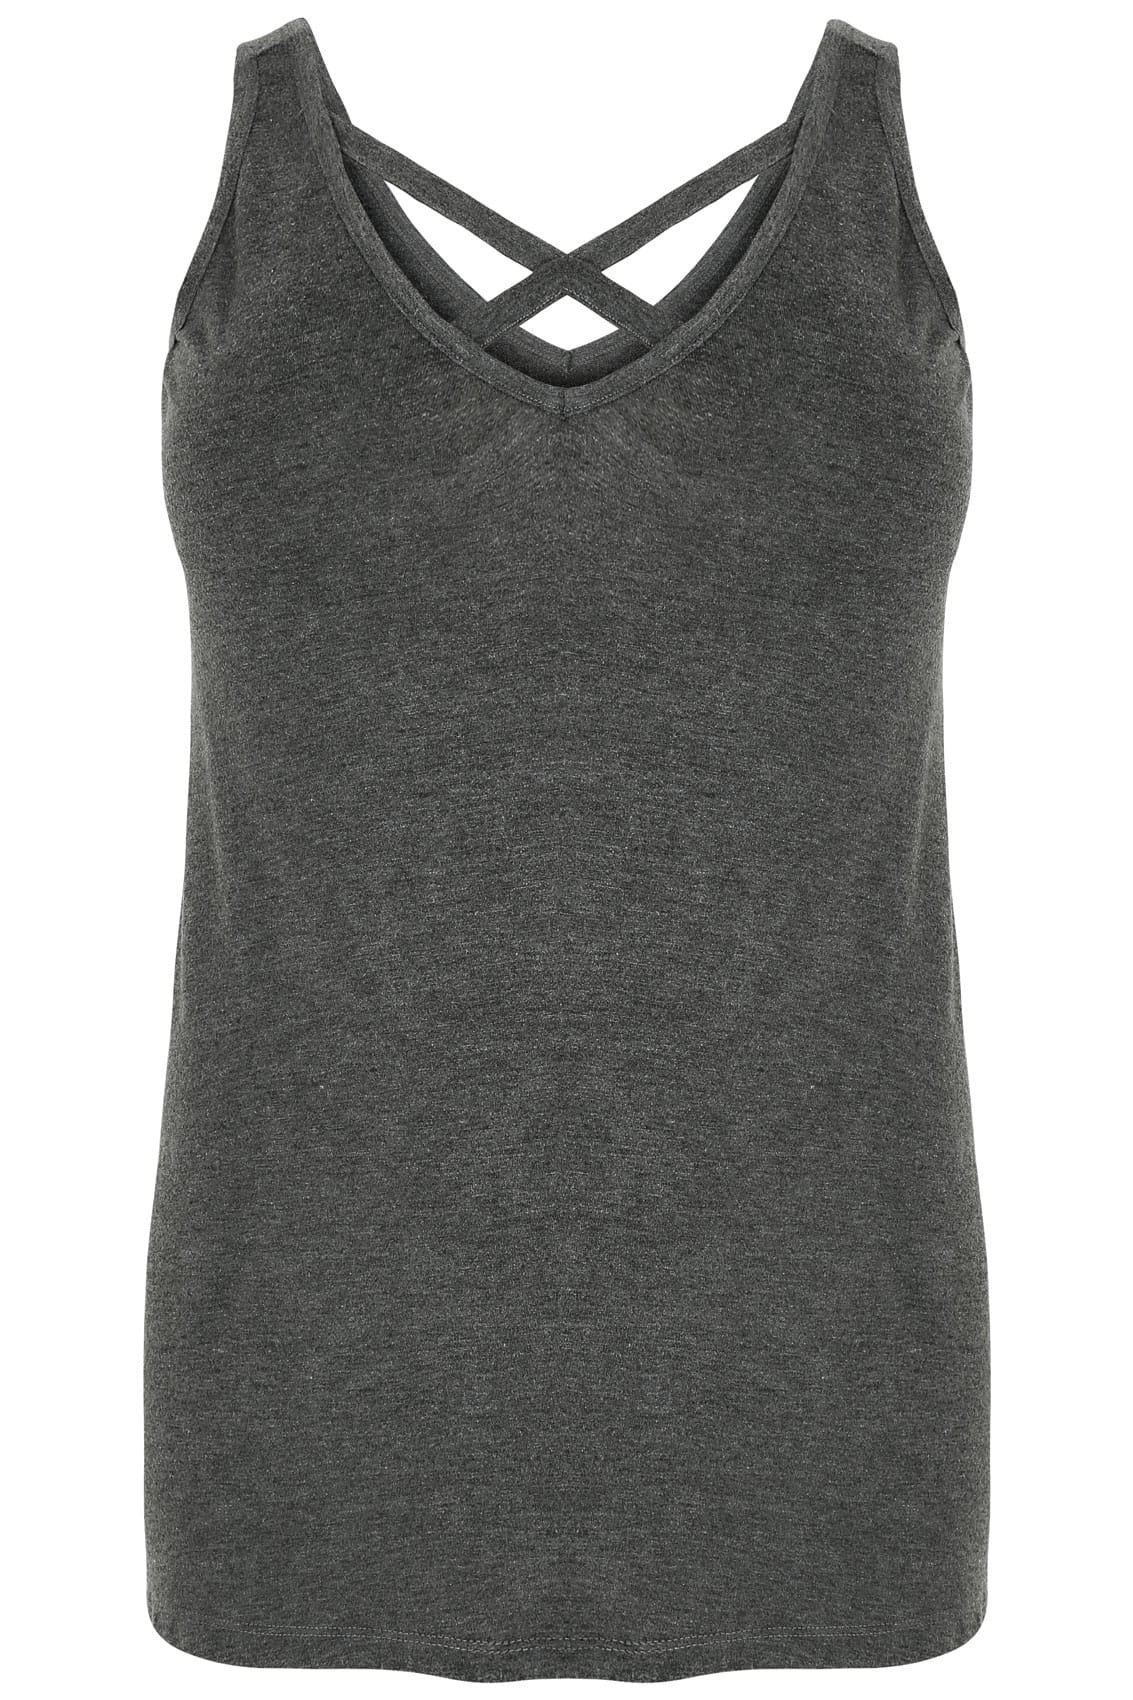 Charcoal V-Neck Vest Top With Cross Over Strap Detail plus size 16 to 36